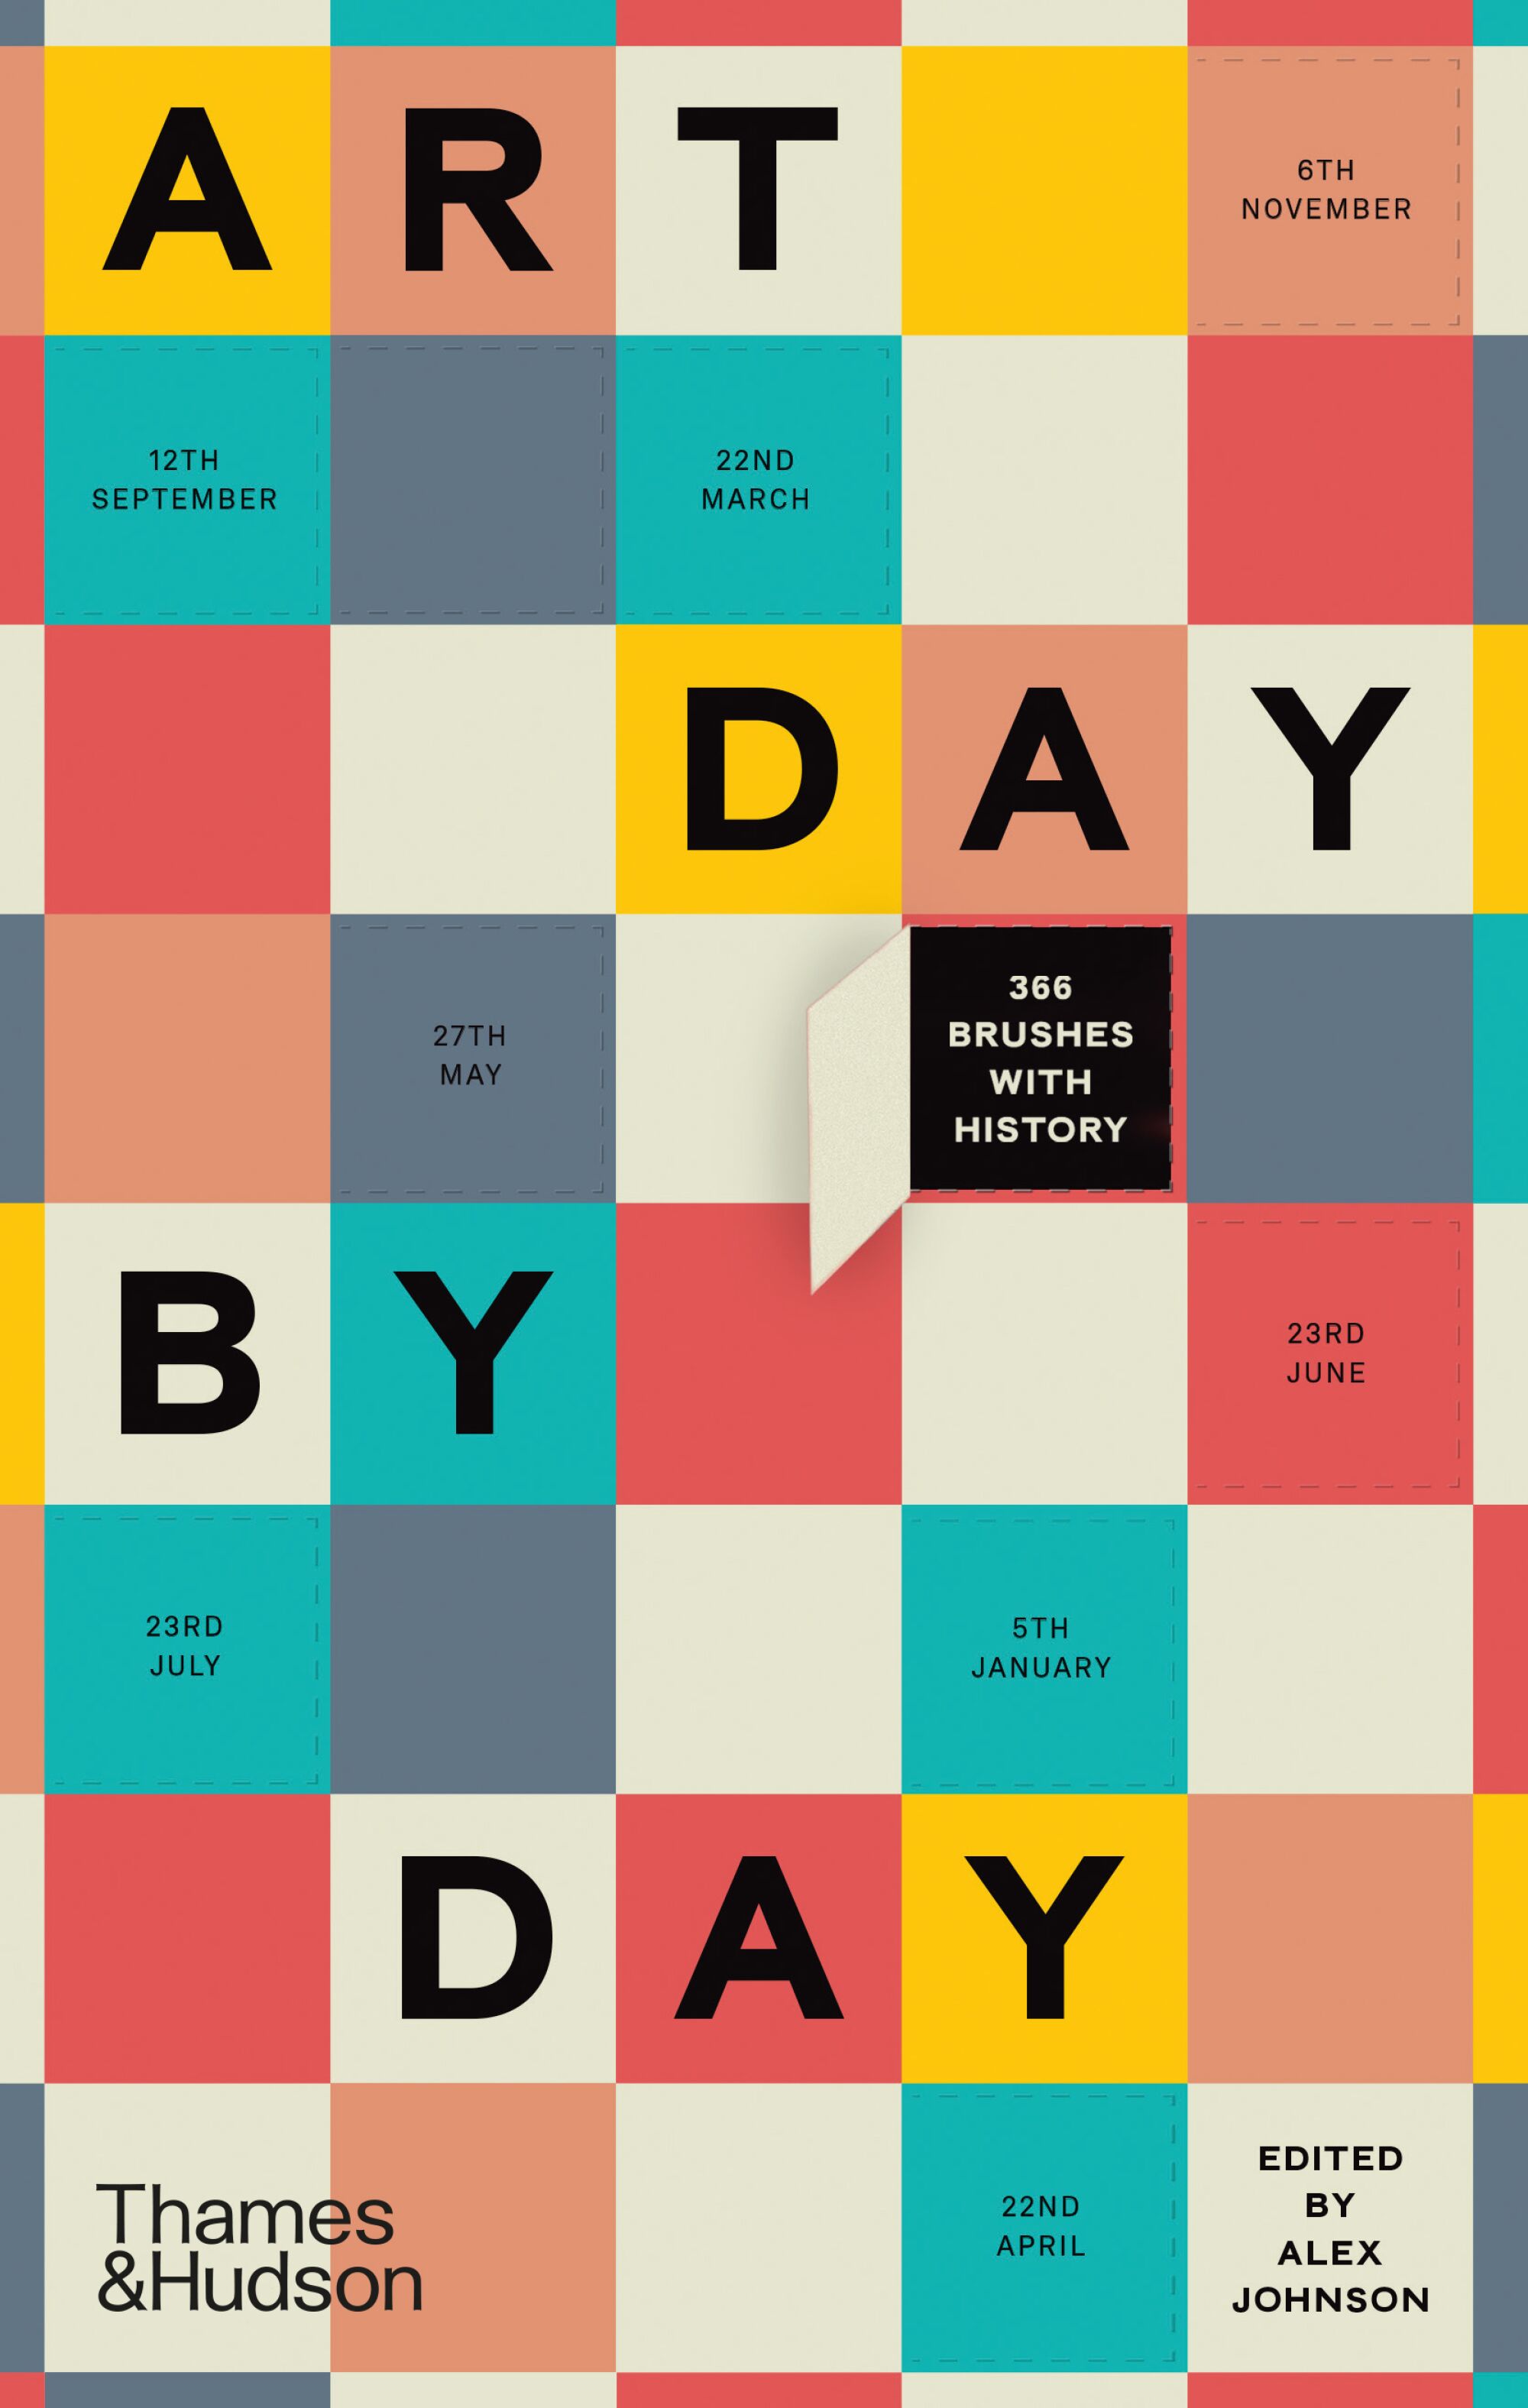 "Art Day by Day," edited by Alex Johnson